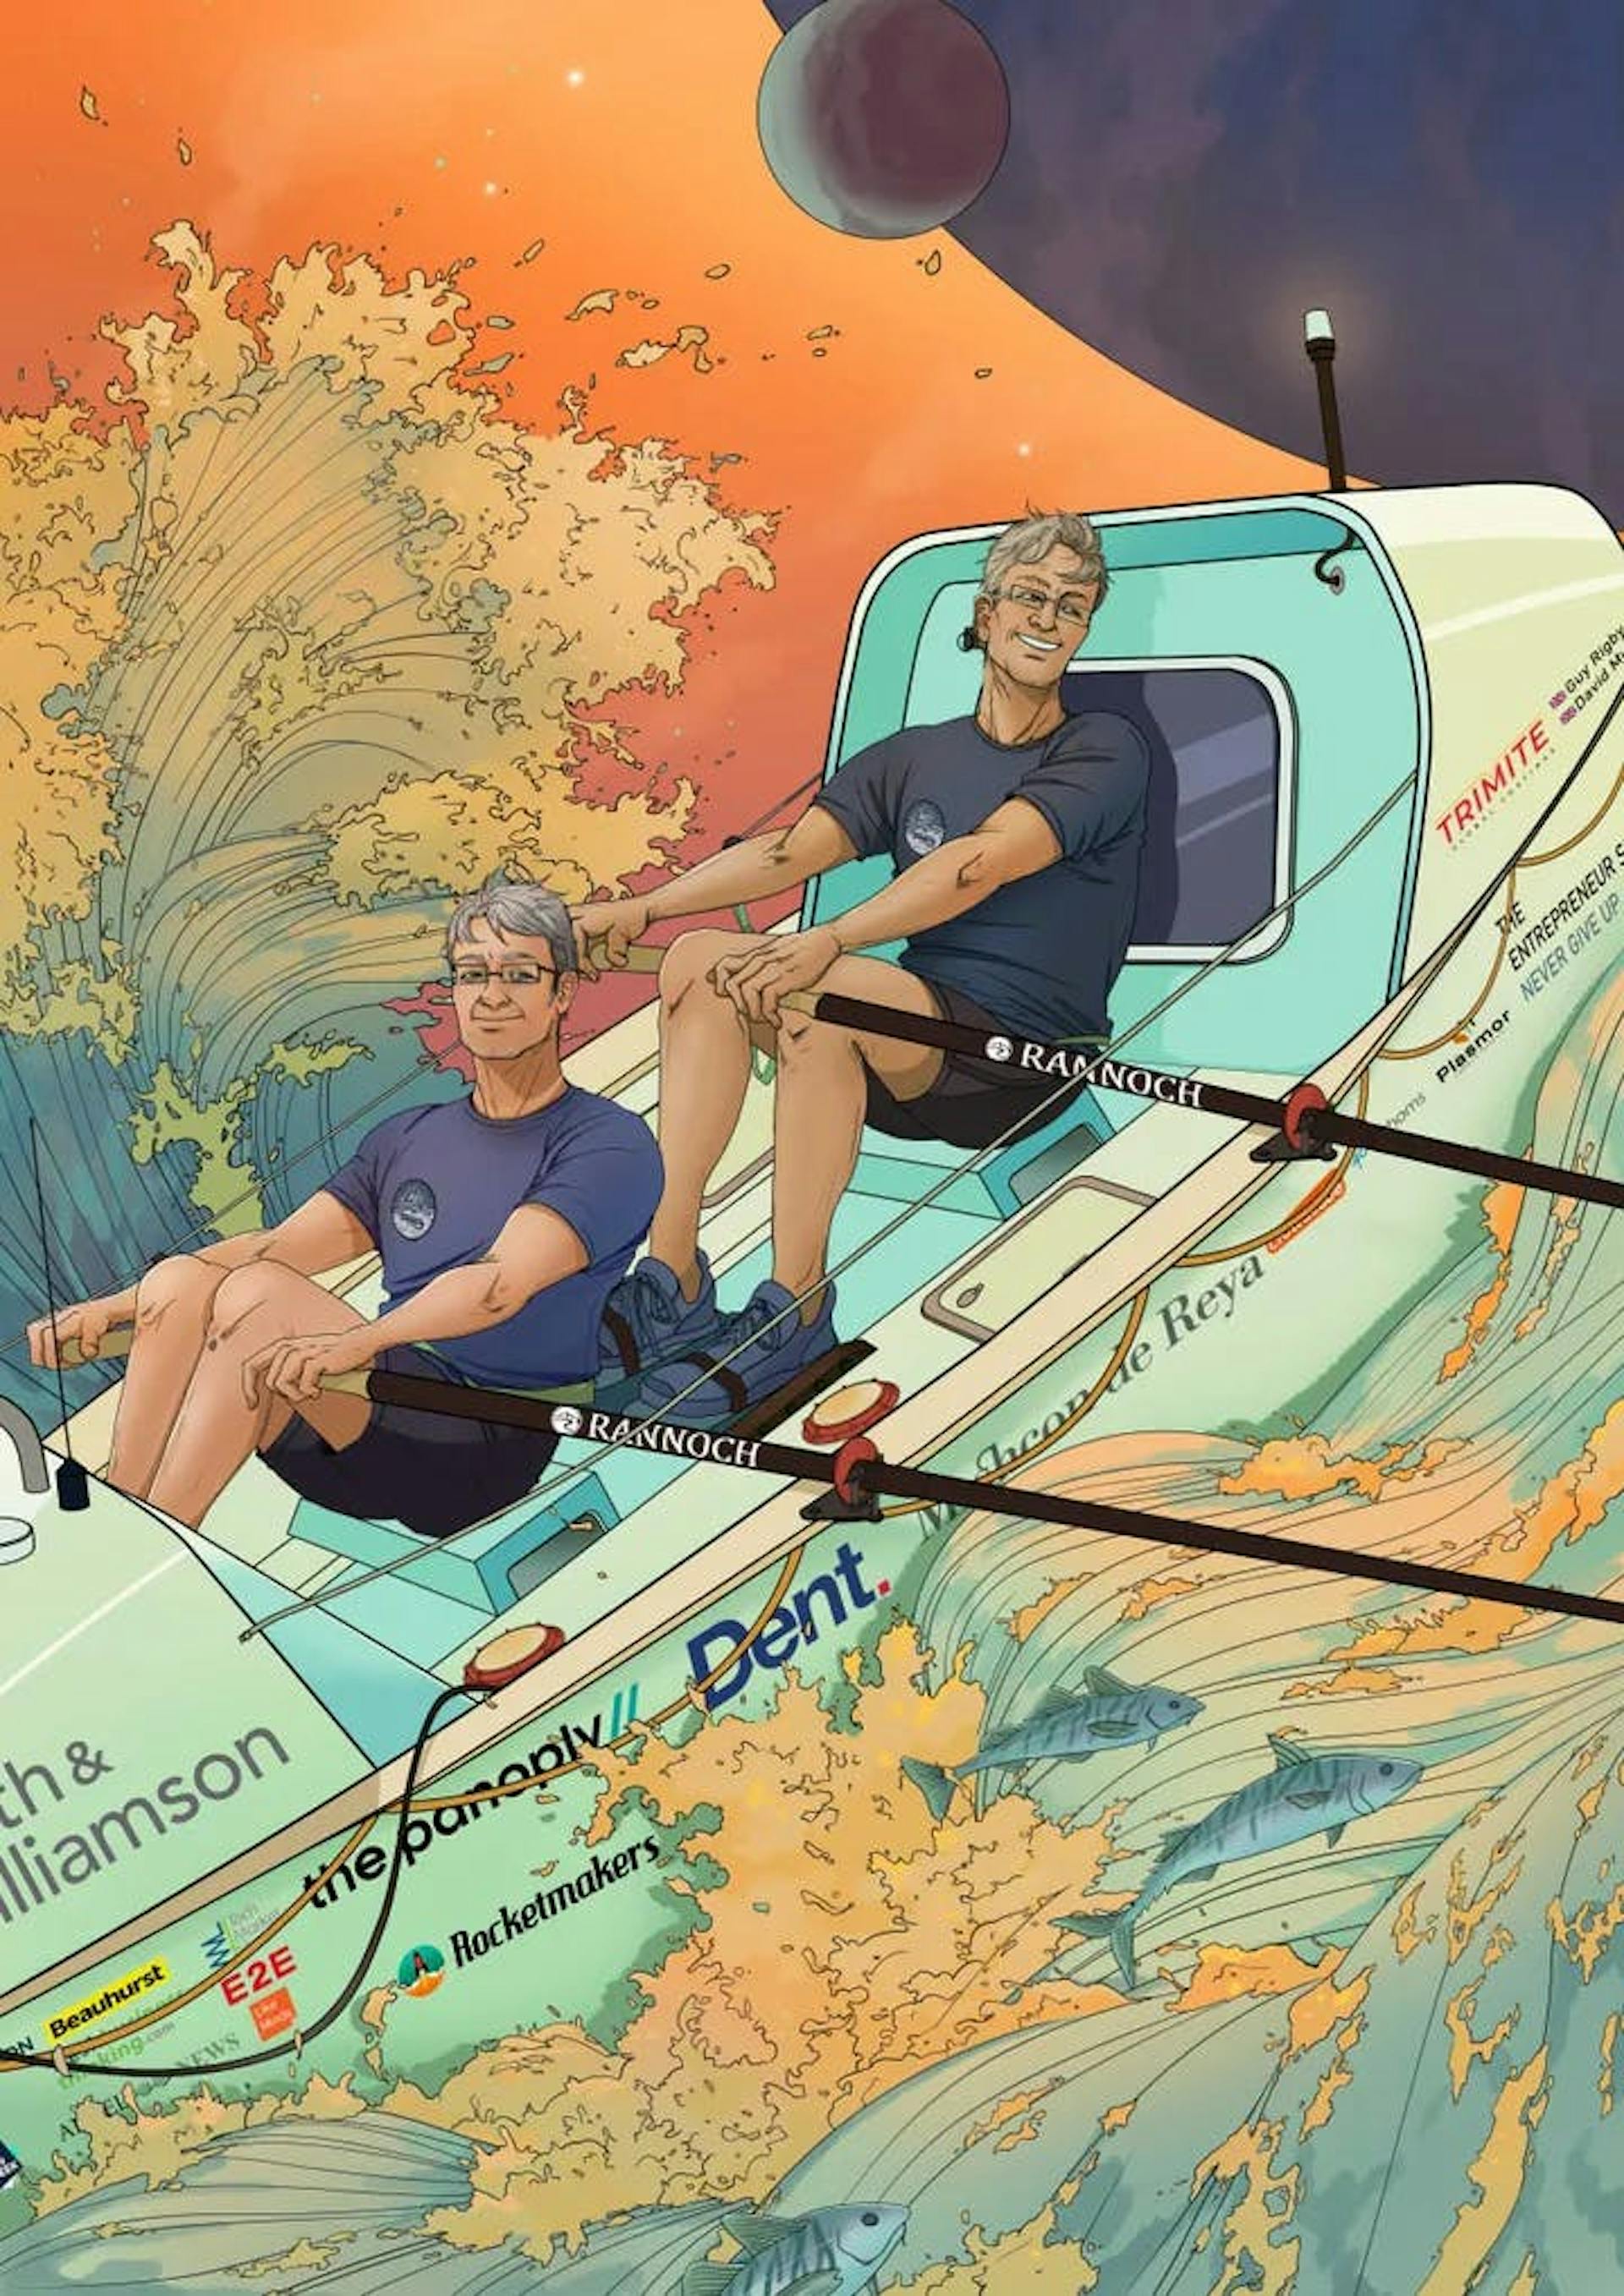 illustration of two men on a rowing boat